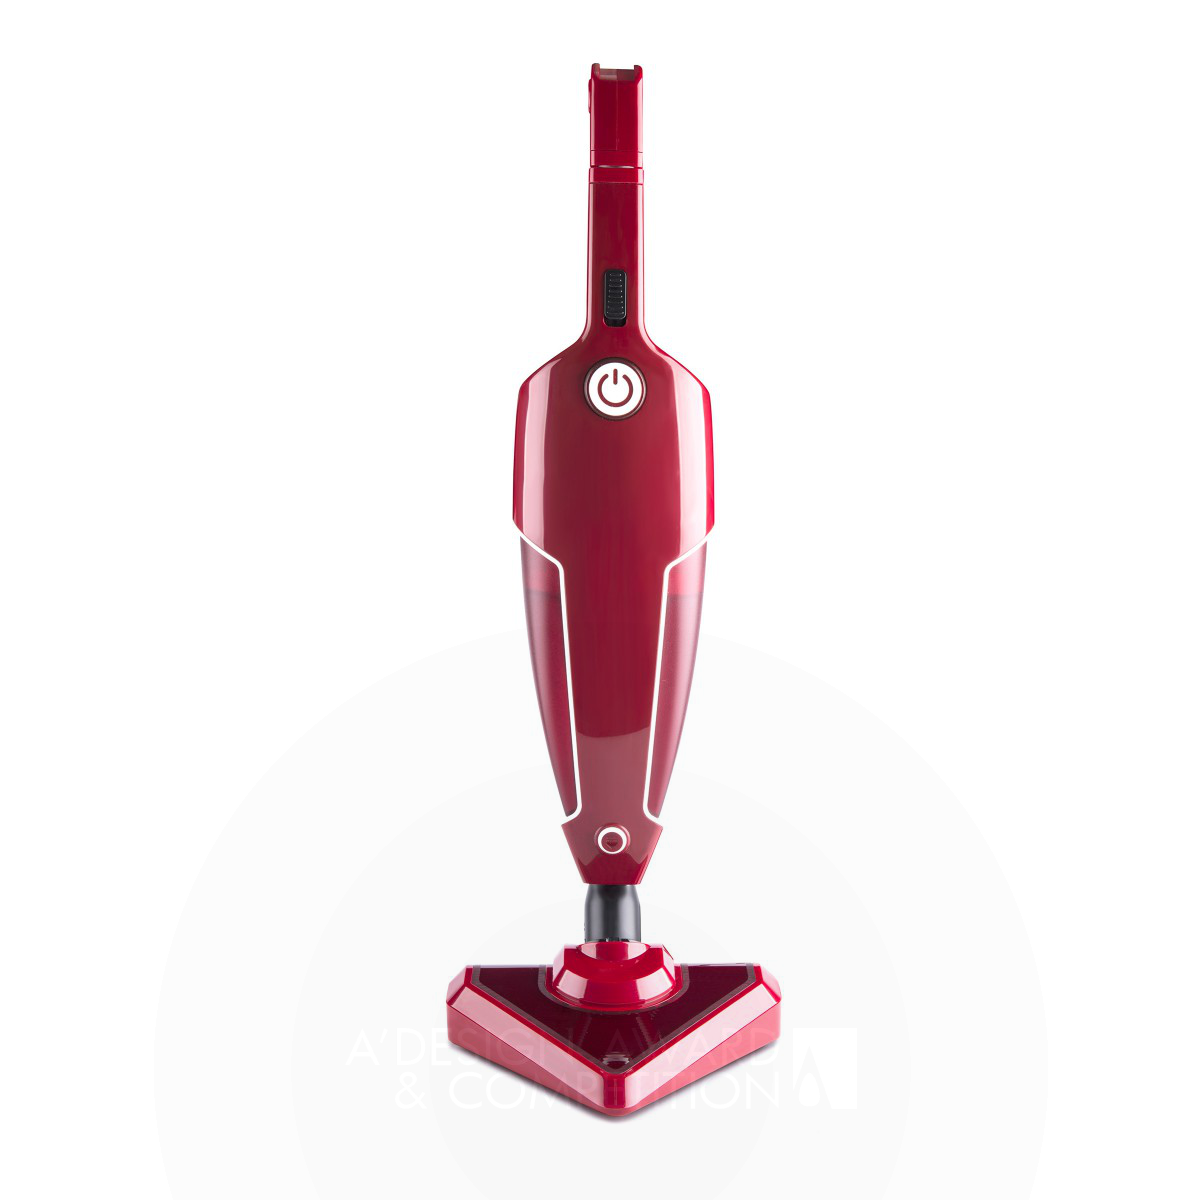 Yasemin Ulukan wins Silver at the prestigious A' Home Appliances Design Award with Tria Upright Vacuum Cleaner.